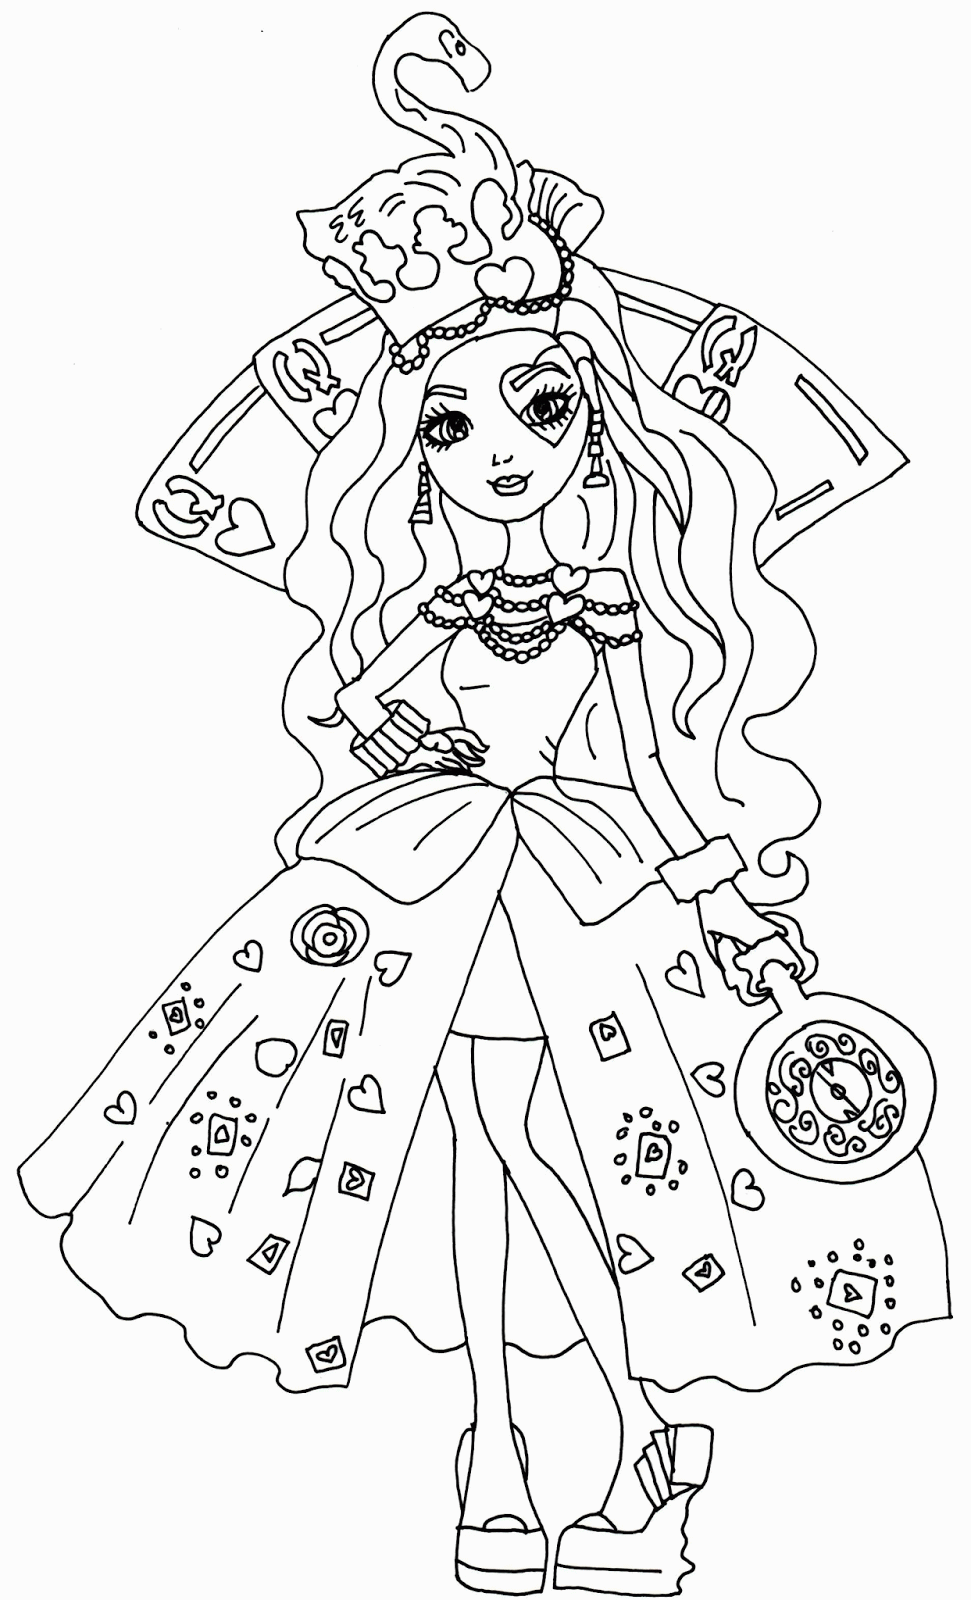 Free Printable Ever After High Coloring Pages: Lizzie Hearts Way ...